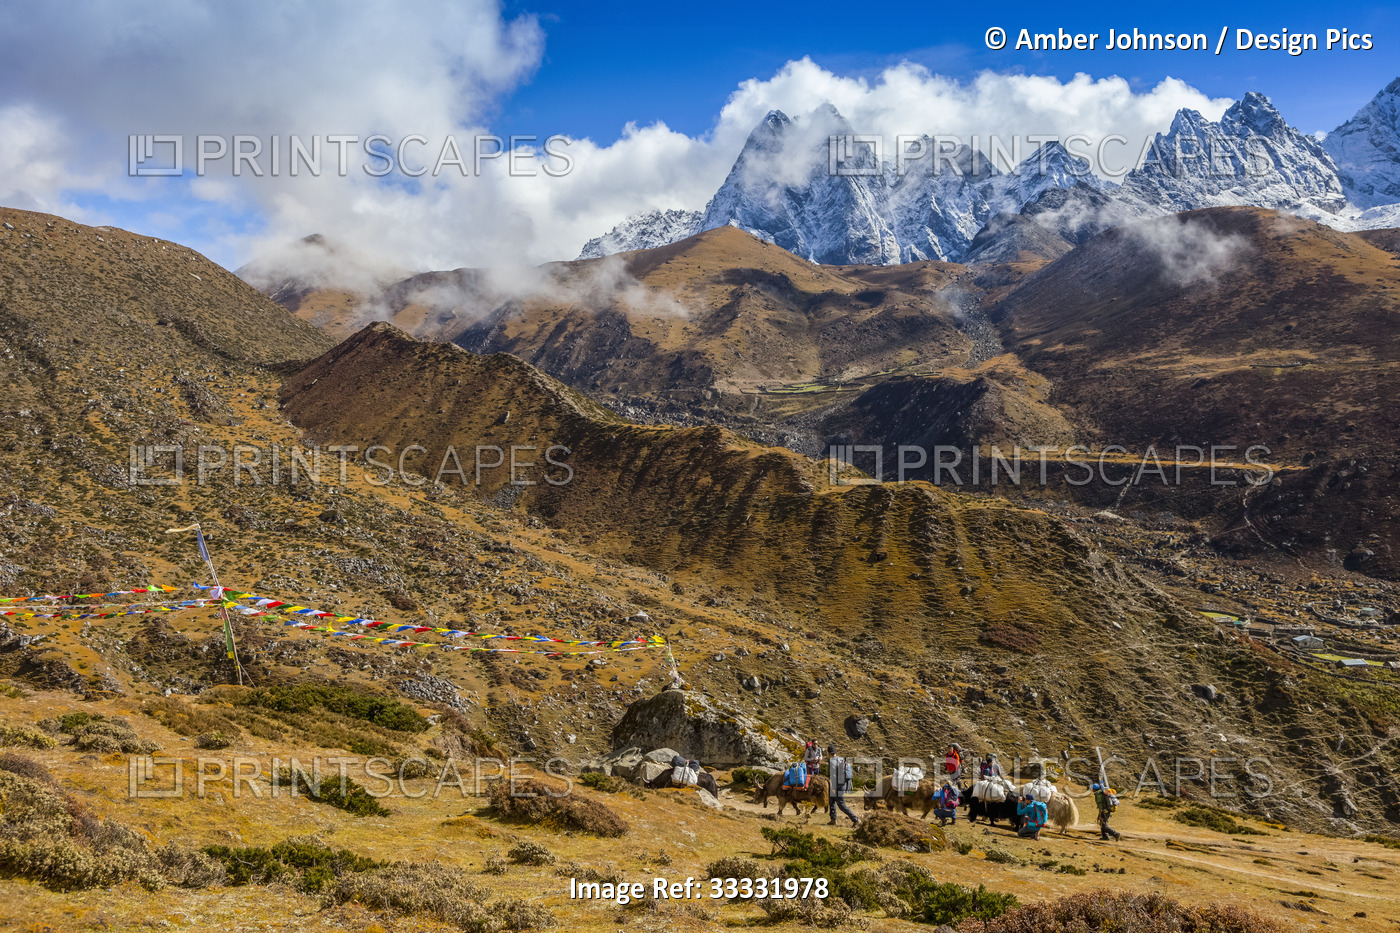 A herder in the foreground leads his yaks (Bos grunniens) carrying bundles of ...